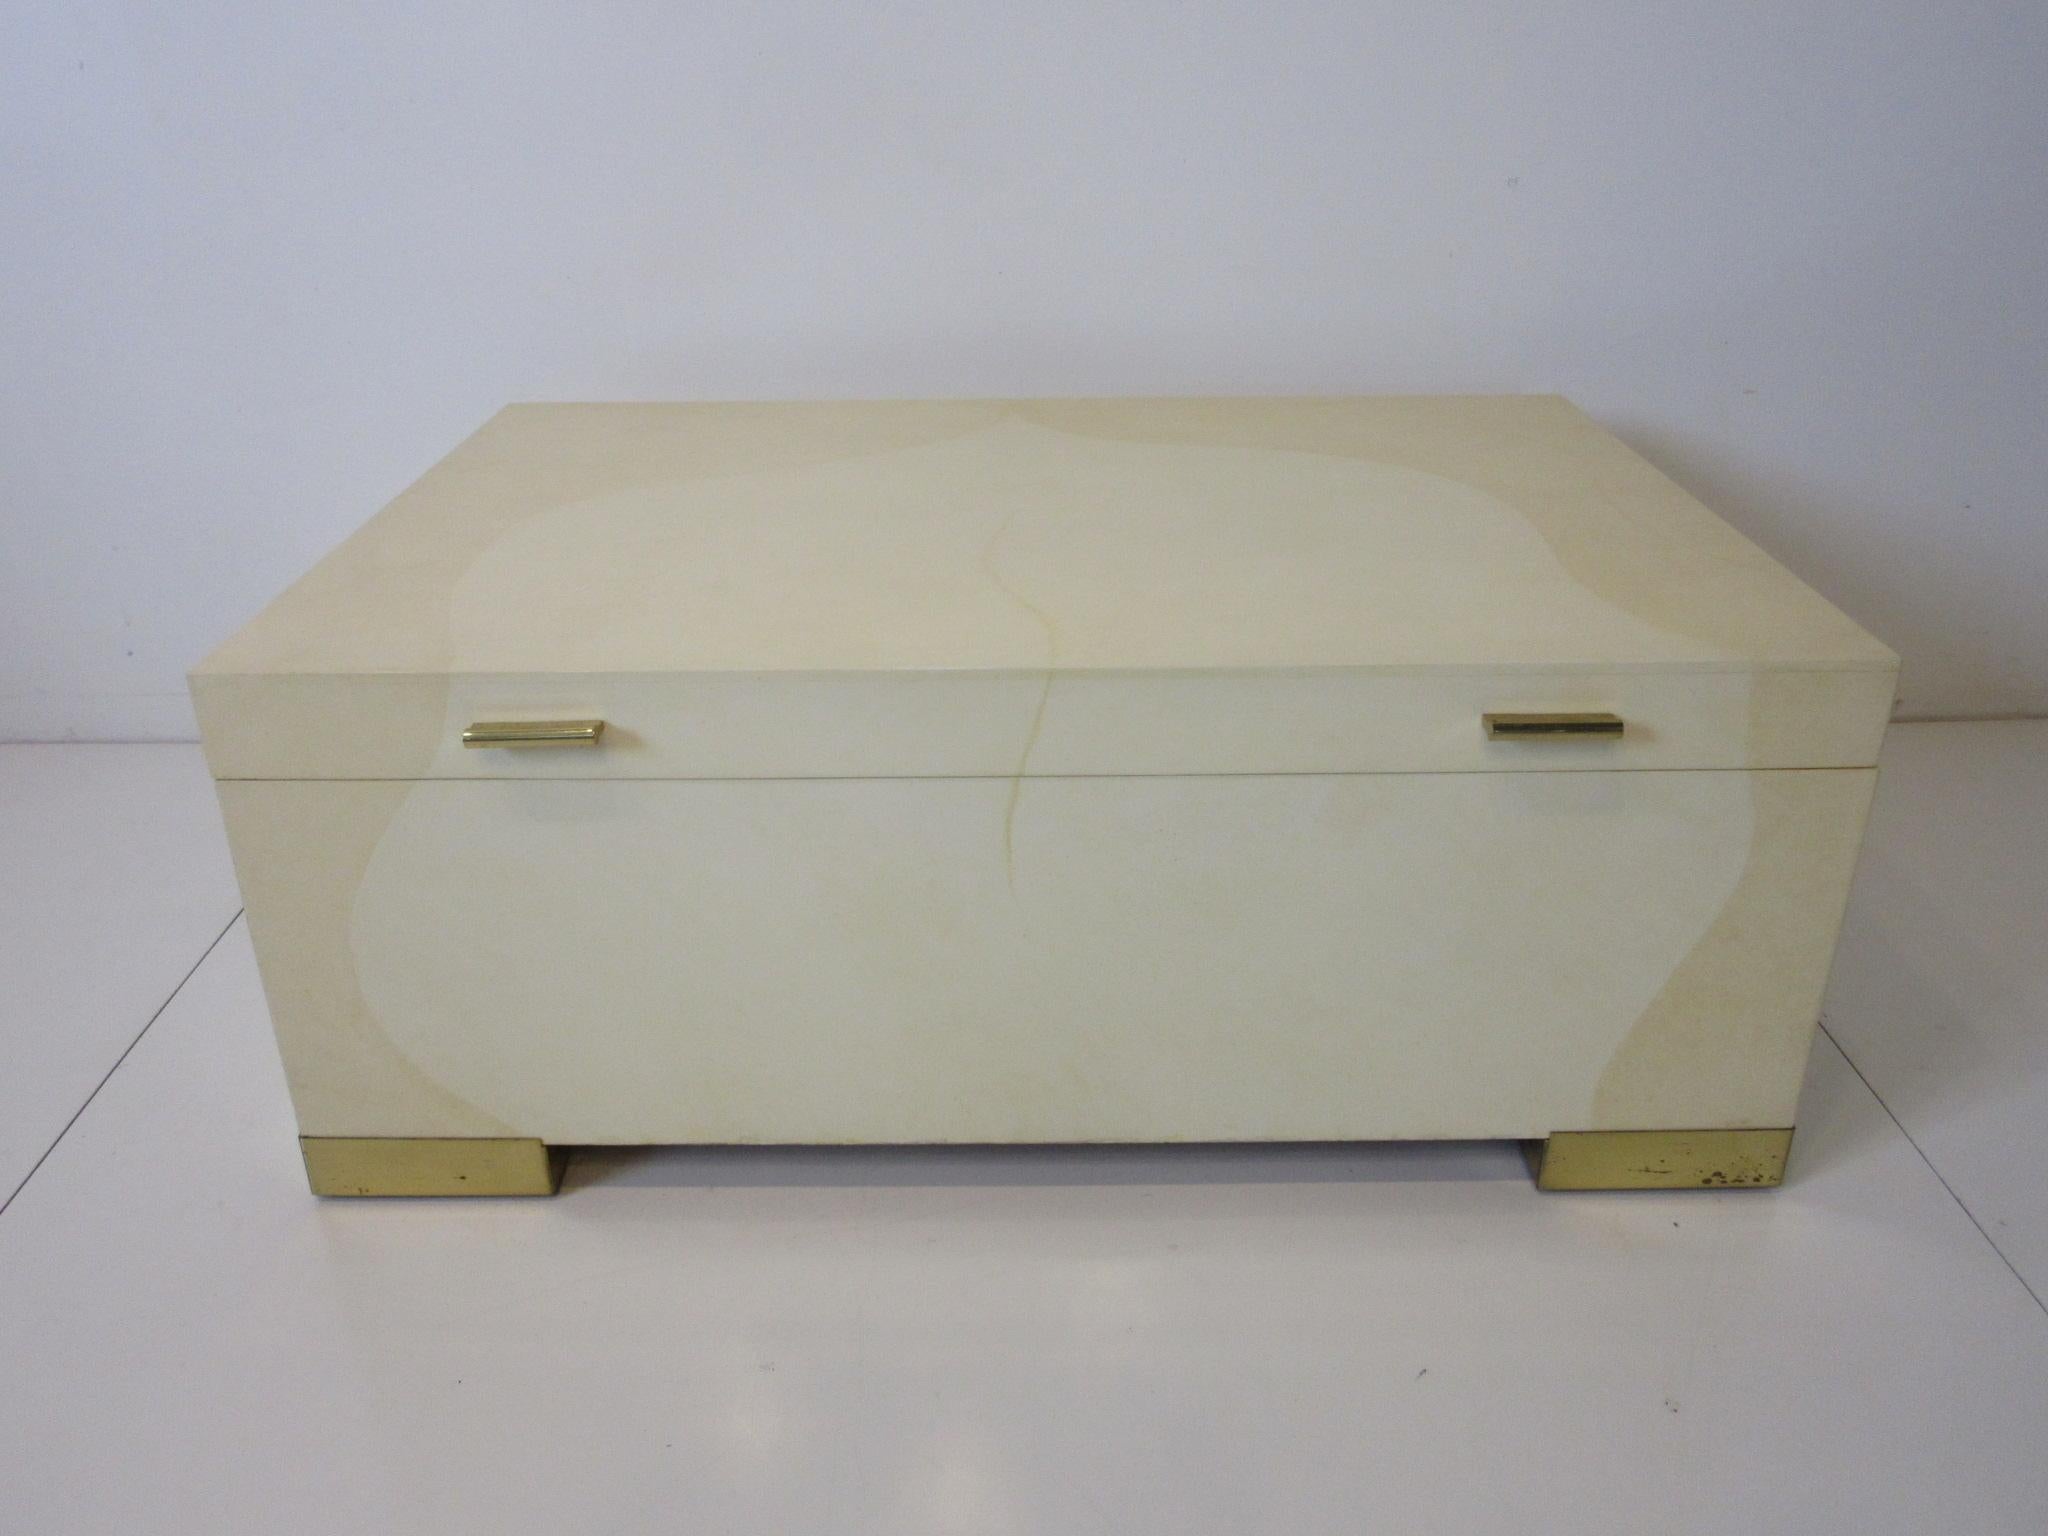 A well crafted coffee table covered in tri colored goatskin / parchment and lacquer having polished brass feet and handles which when opened revels a nice sized storage area. A piece that works as both a coffee table and storage box designed by Karl